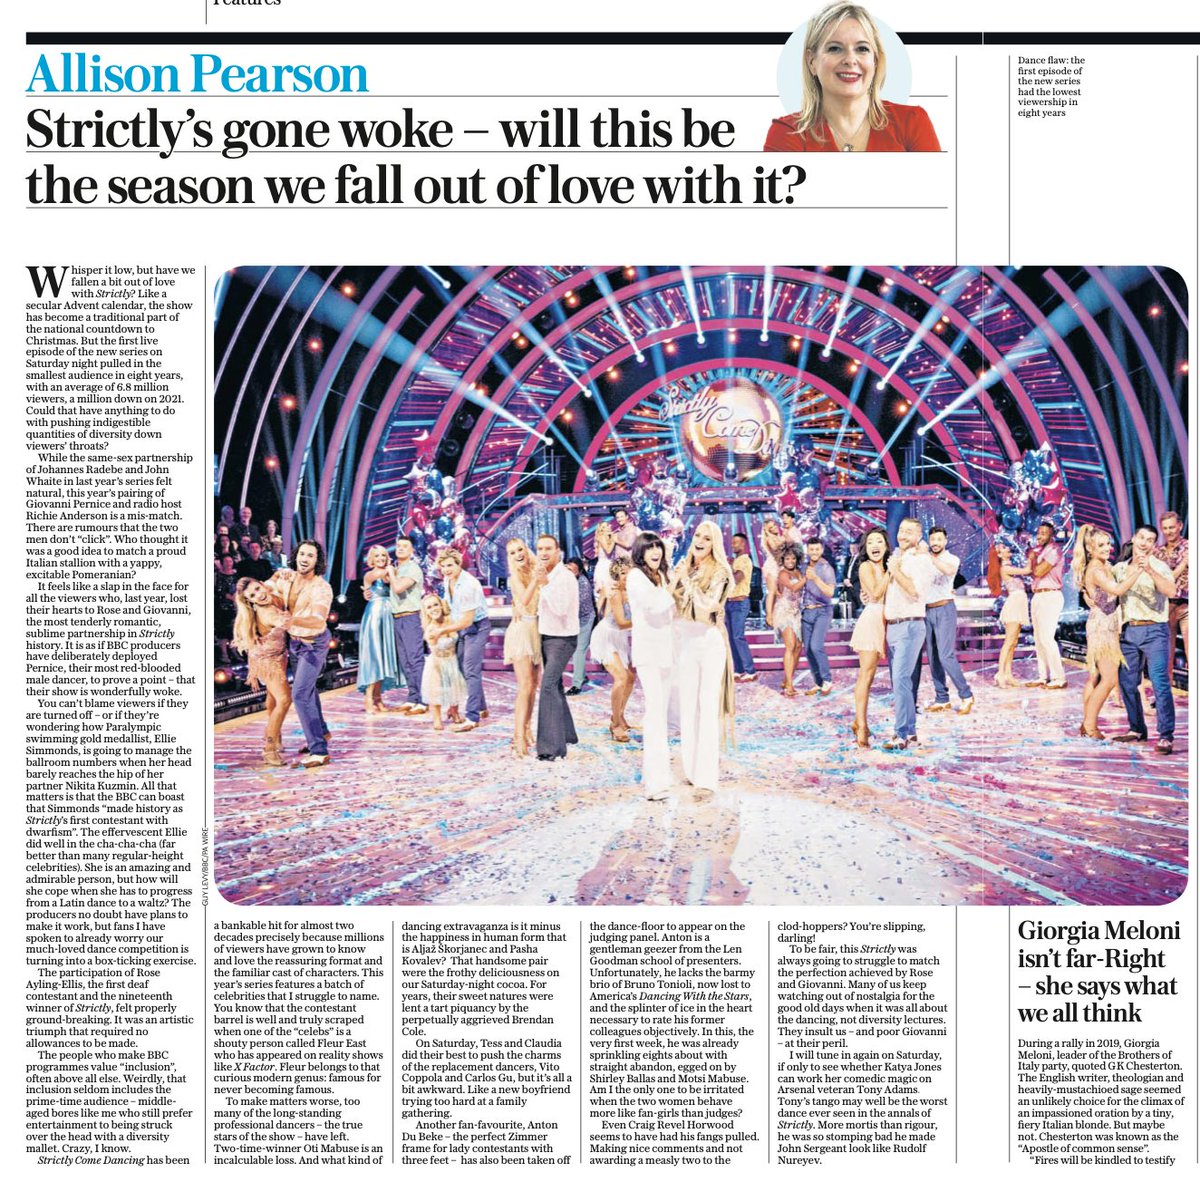 This is poisonous @AllisonPearson People with dwarfism are regularly photographed & jeered when they simple go shopping. @EllieSimmonds1 on #Strictly = visibility and understanding. If it makes your Saturday night uncomfortable that says so much about you.